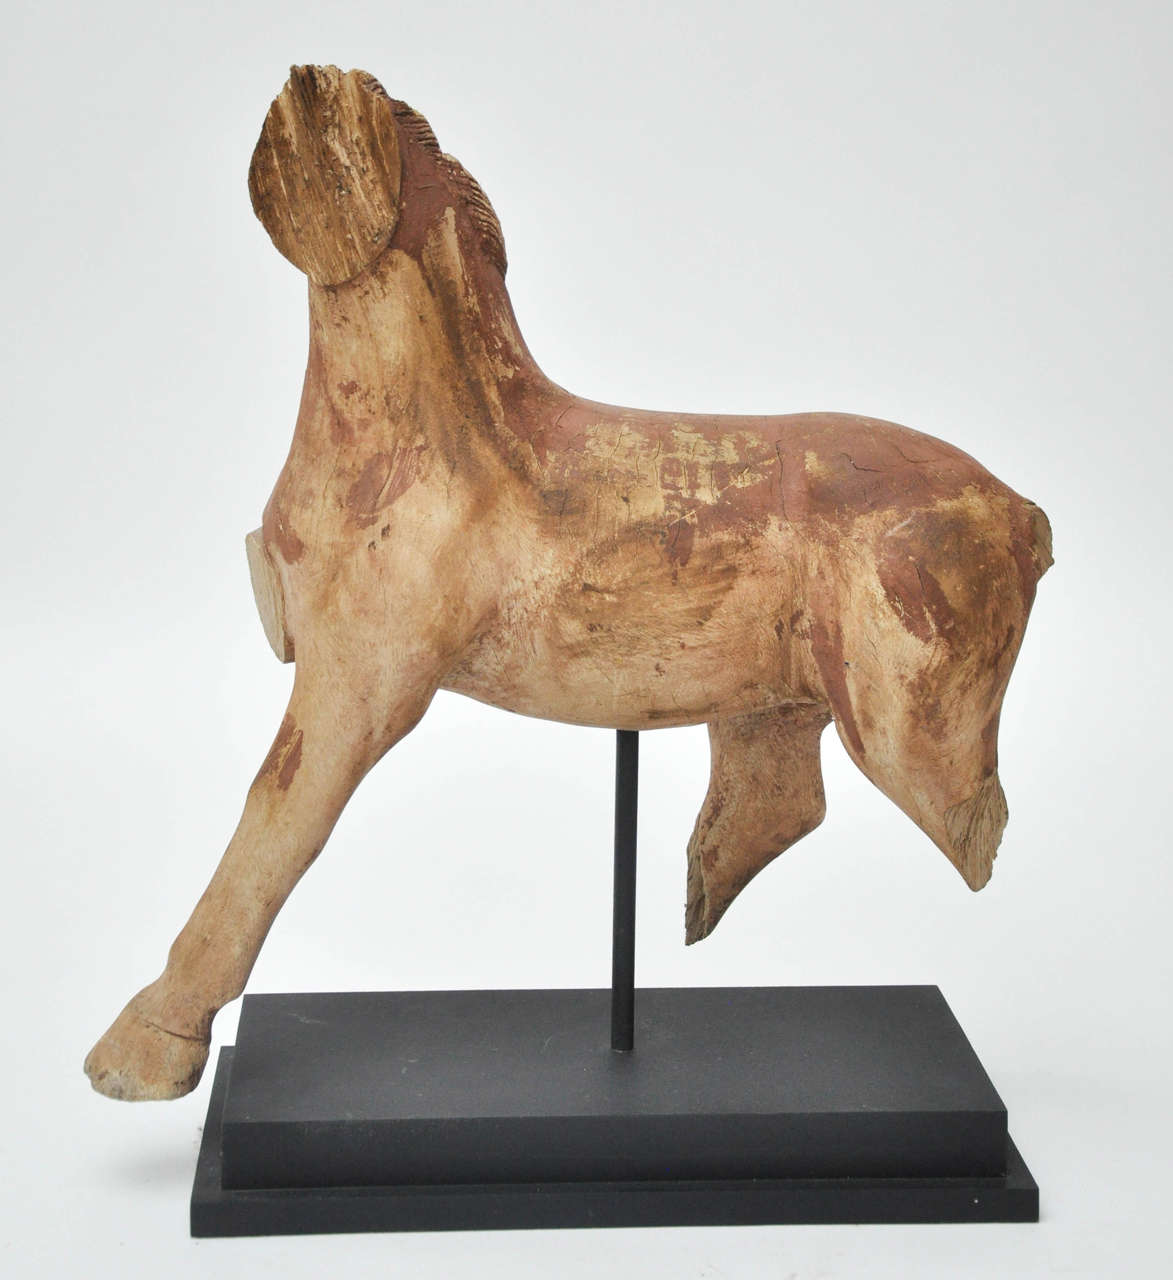 20th century French mounted wood horse fragment. Mounted horse fragment found in the South of France. Beautiful decorative object.